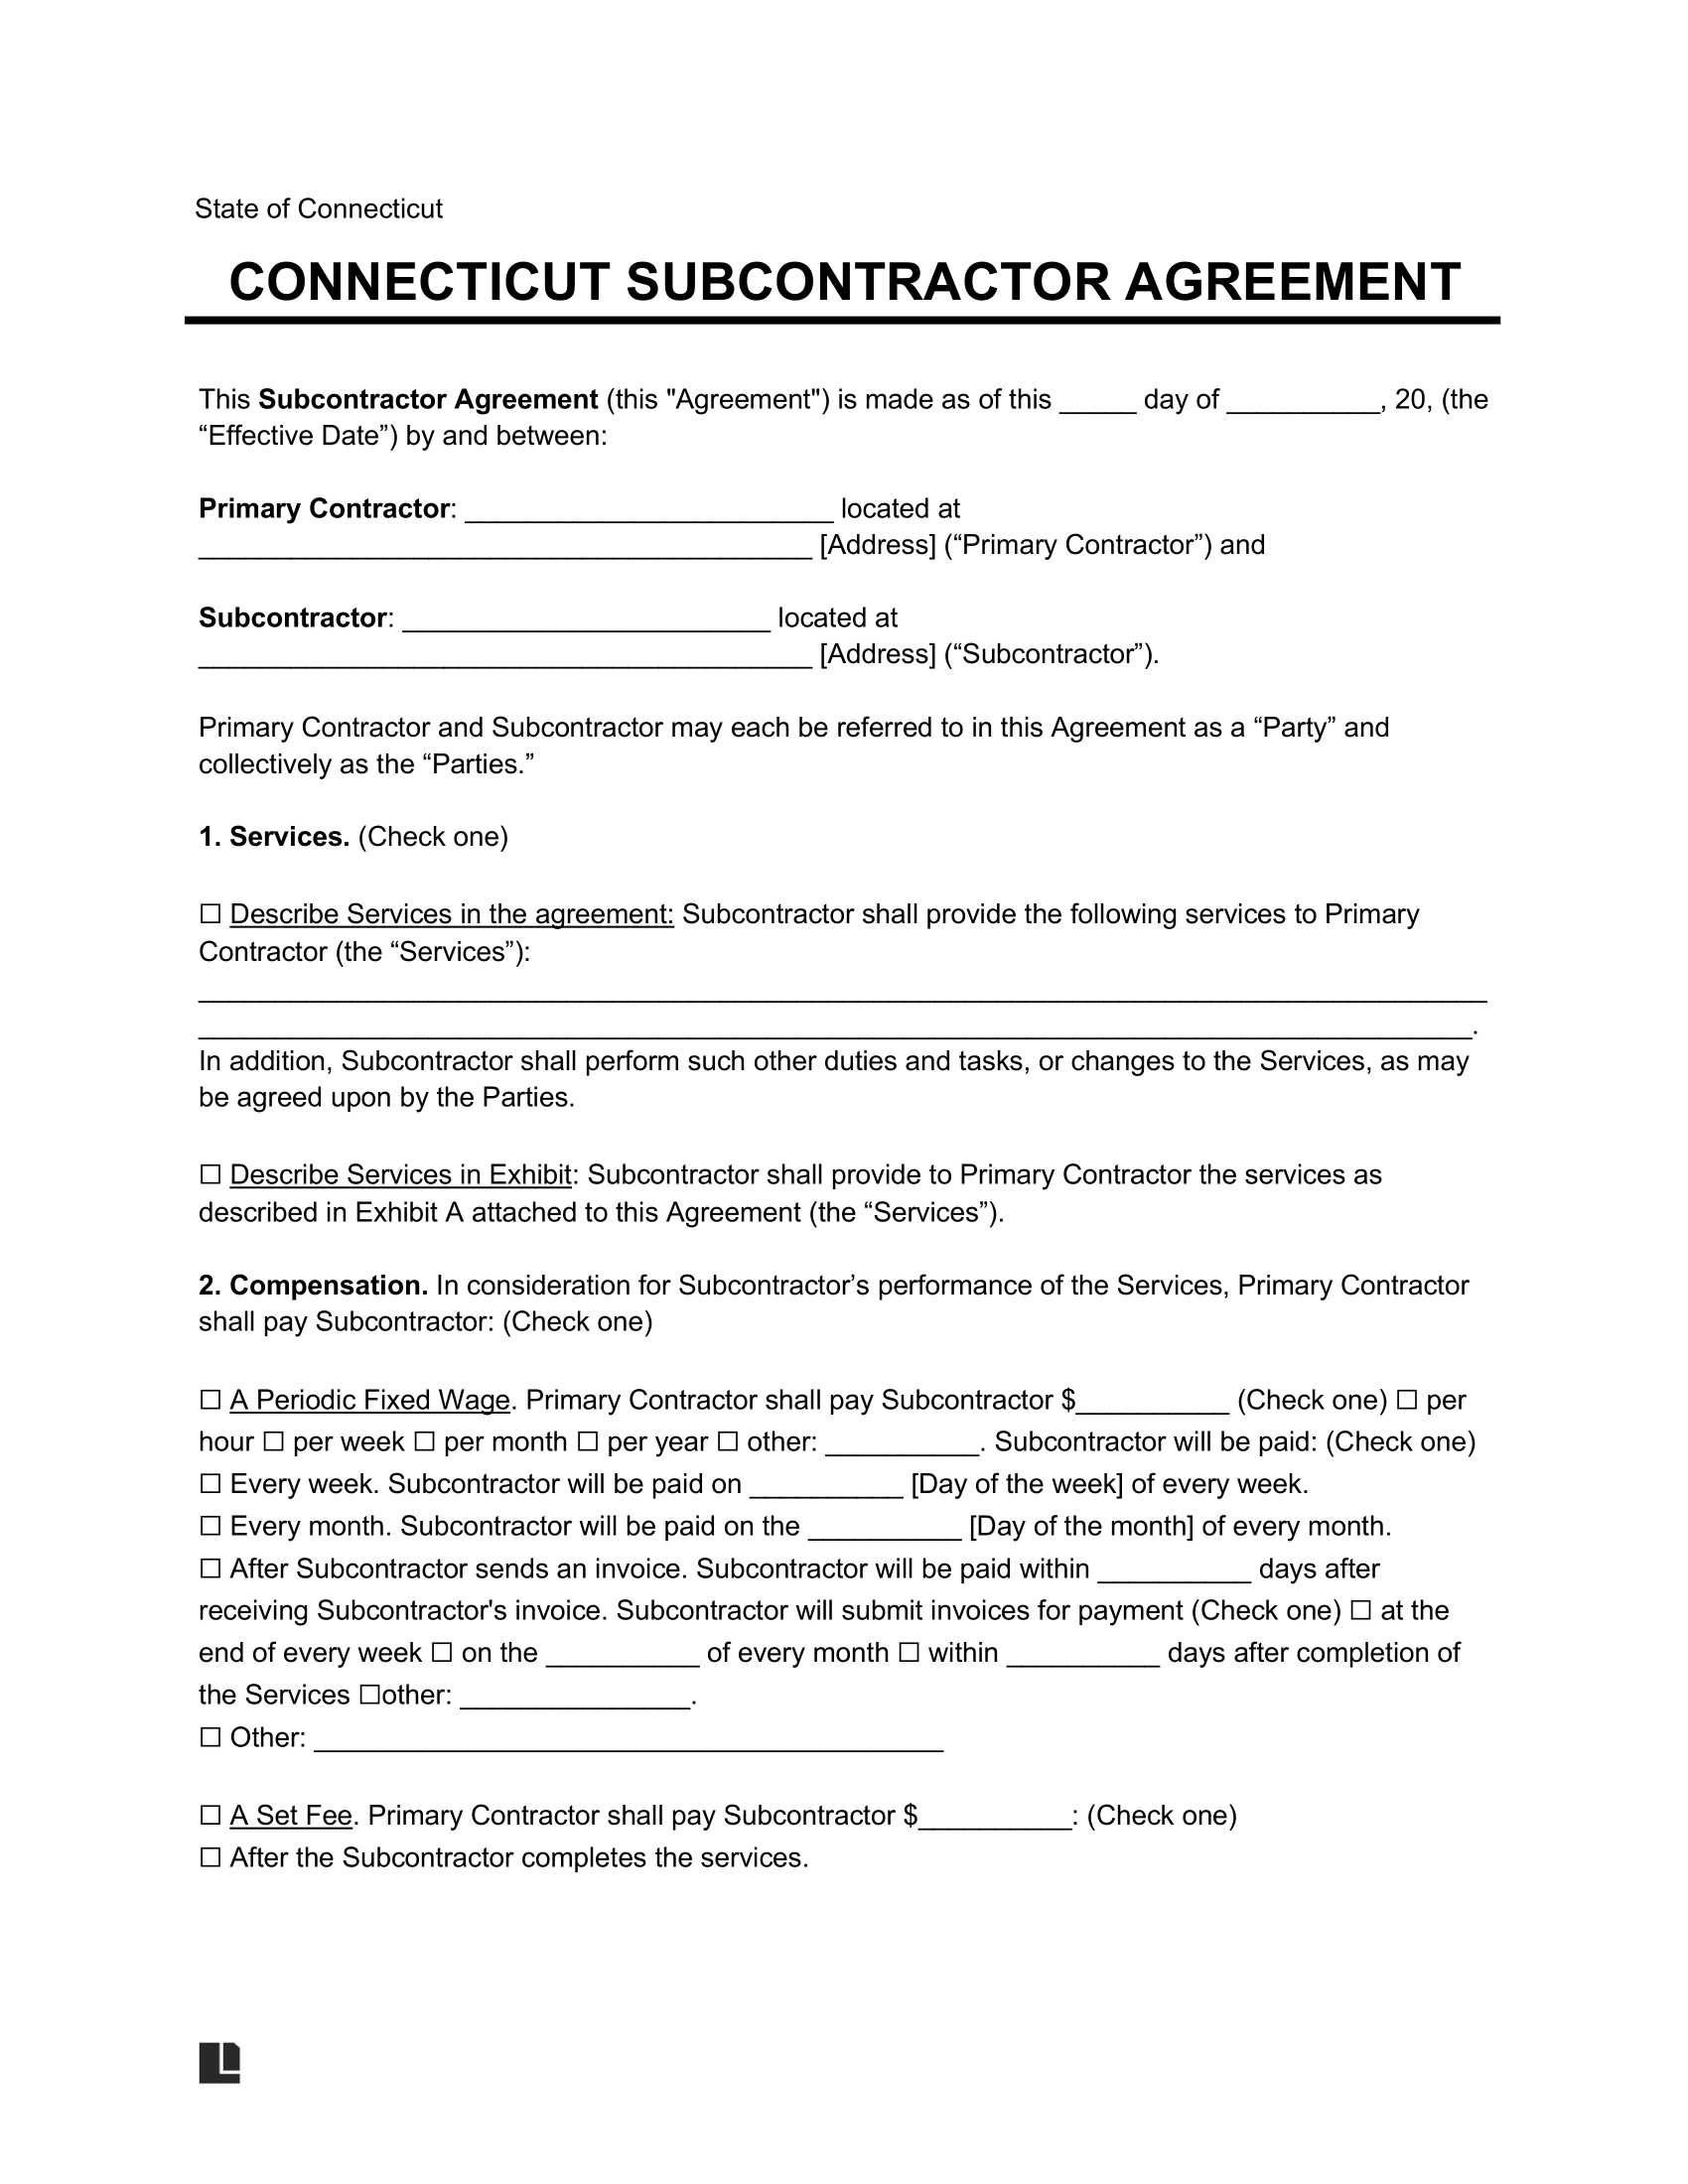 connecticut subcontractor agreement template